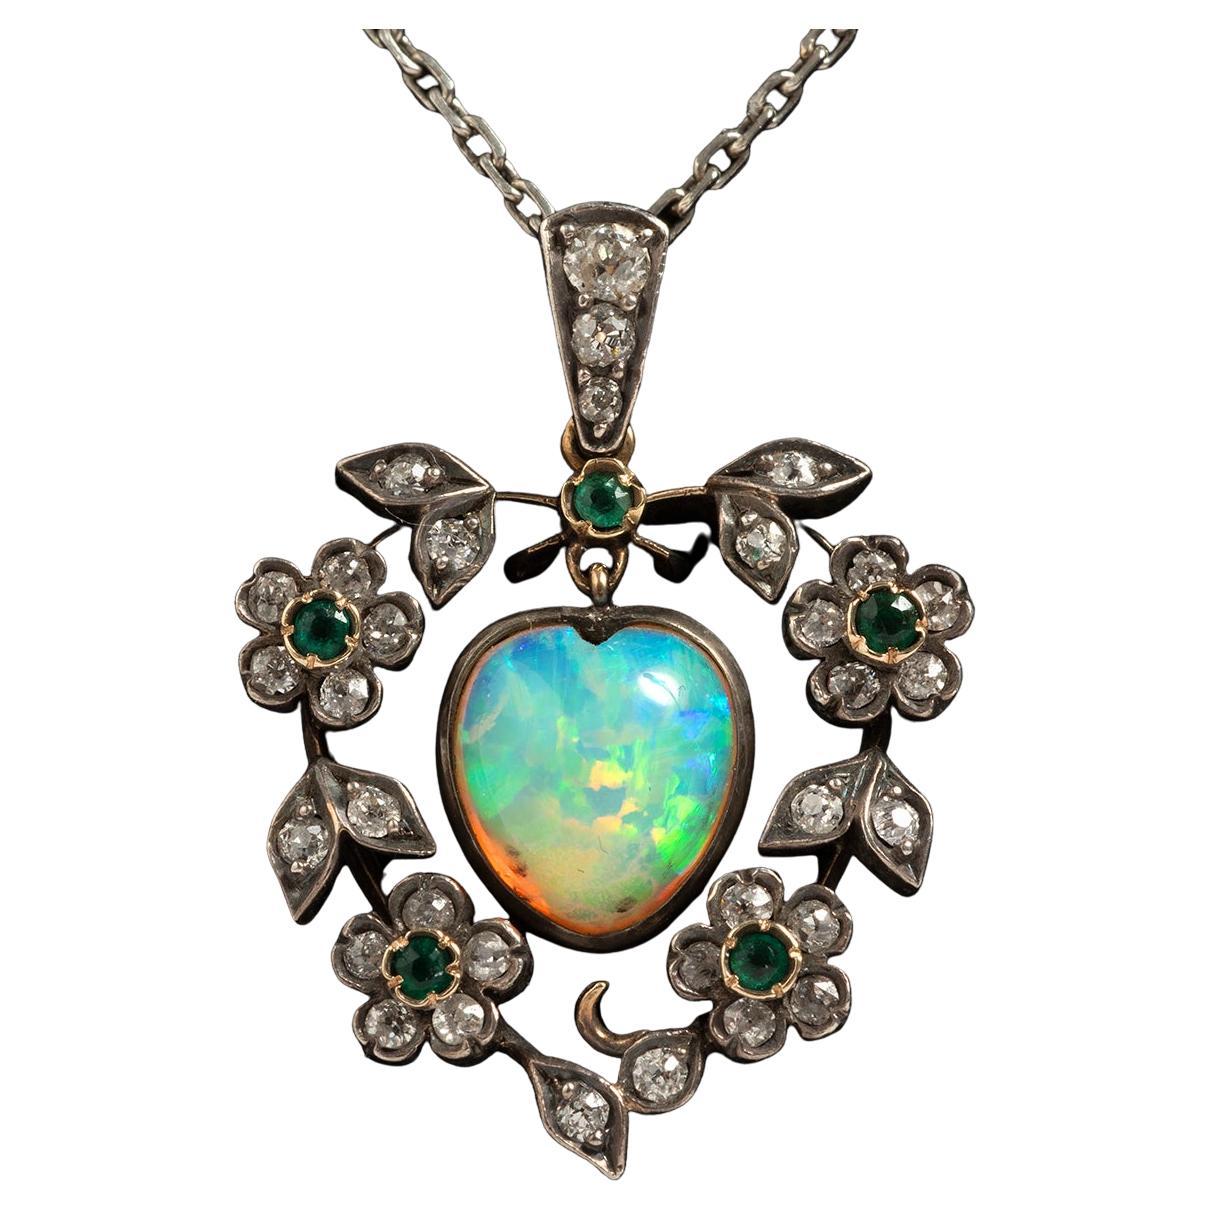 Victorian 18 Carat White Gold Necklace with Diamonds, Emeralds and Opal Stone. For Sale